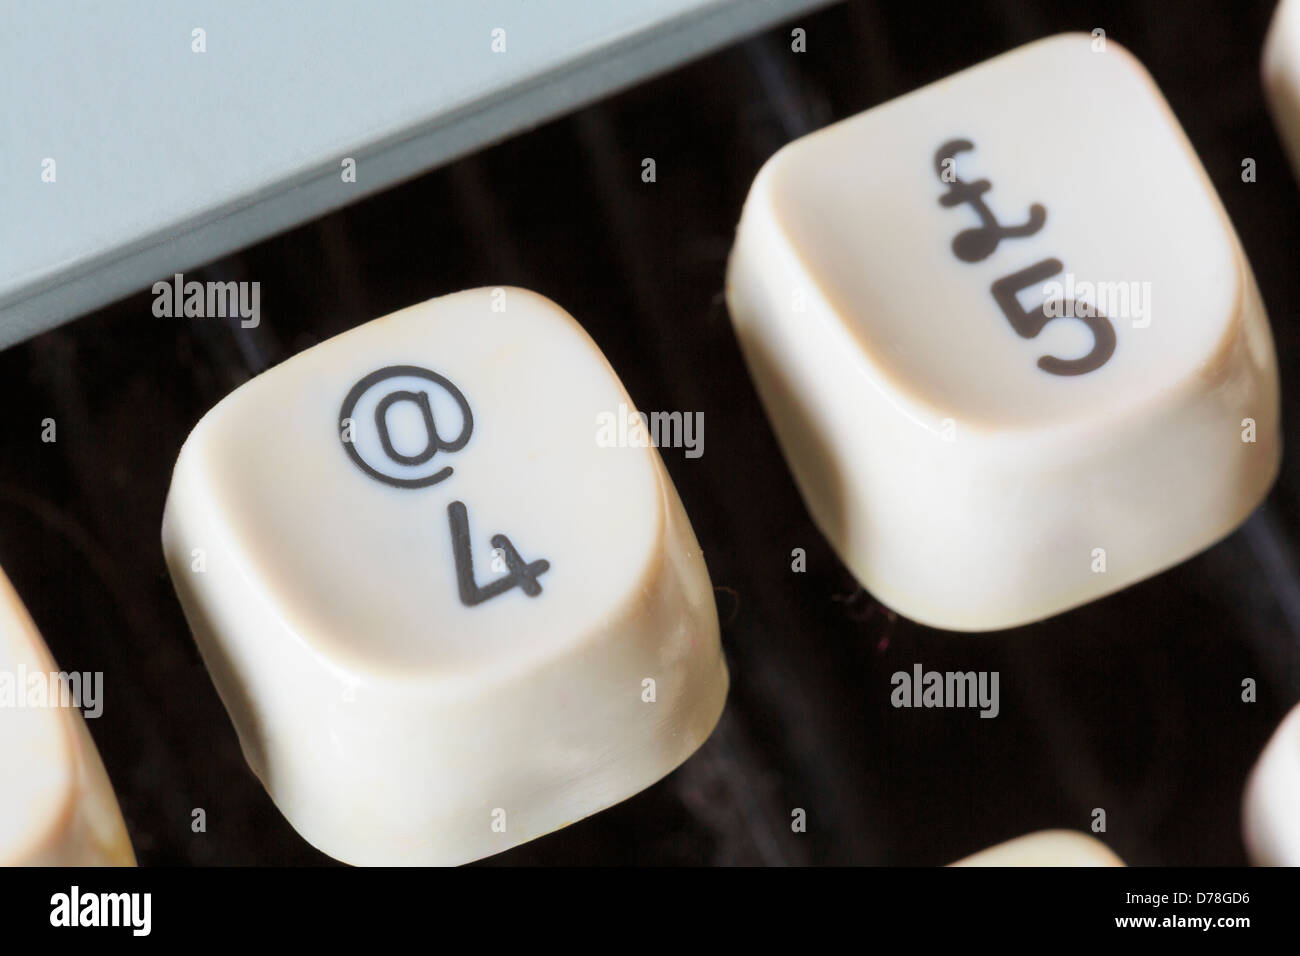 At @ symbol with 4 and £ pound symbol with 5 on typewriter keys. Blog concept Stock Photo